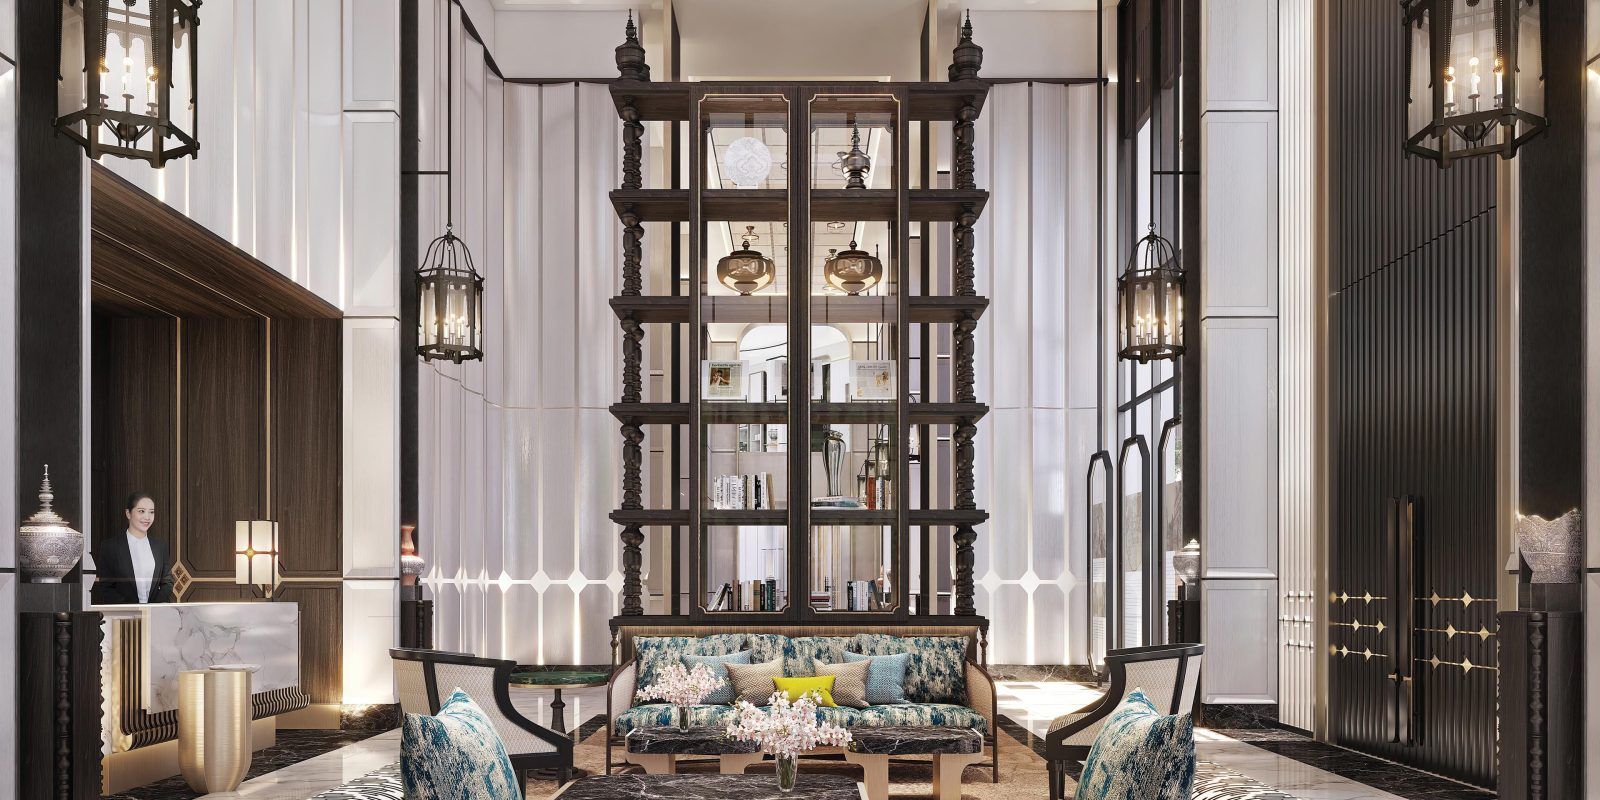 The 26 Most-Anticipated New Hotels of 2023